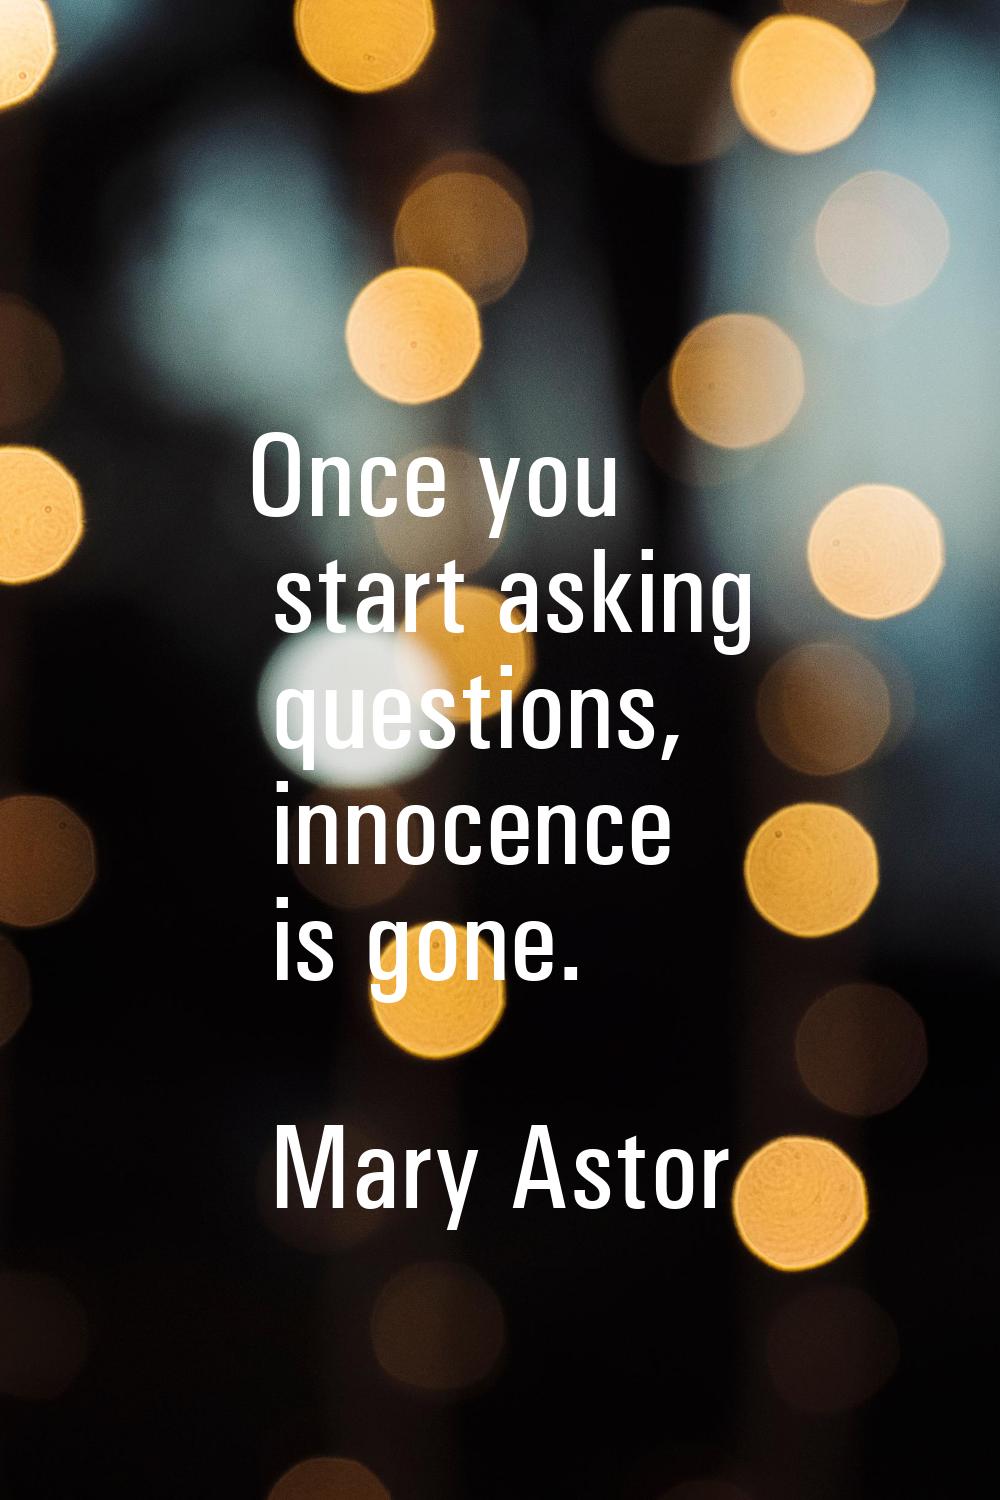 Once you start asking questions, innocence is gone.